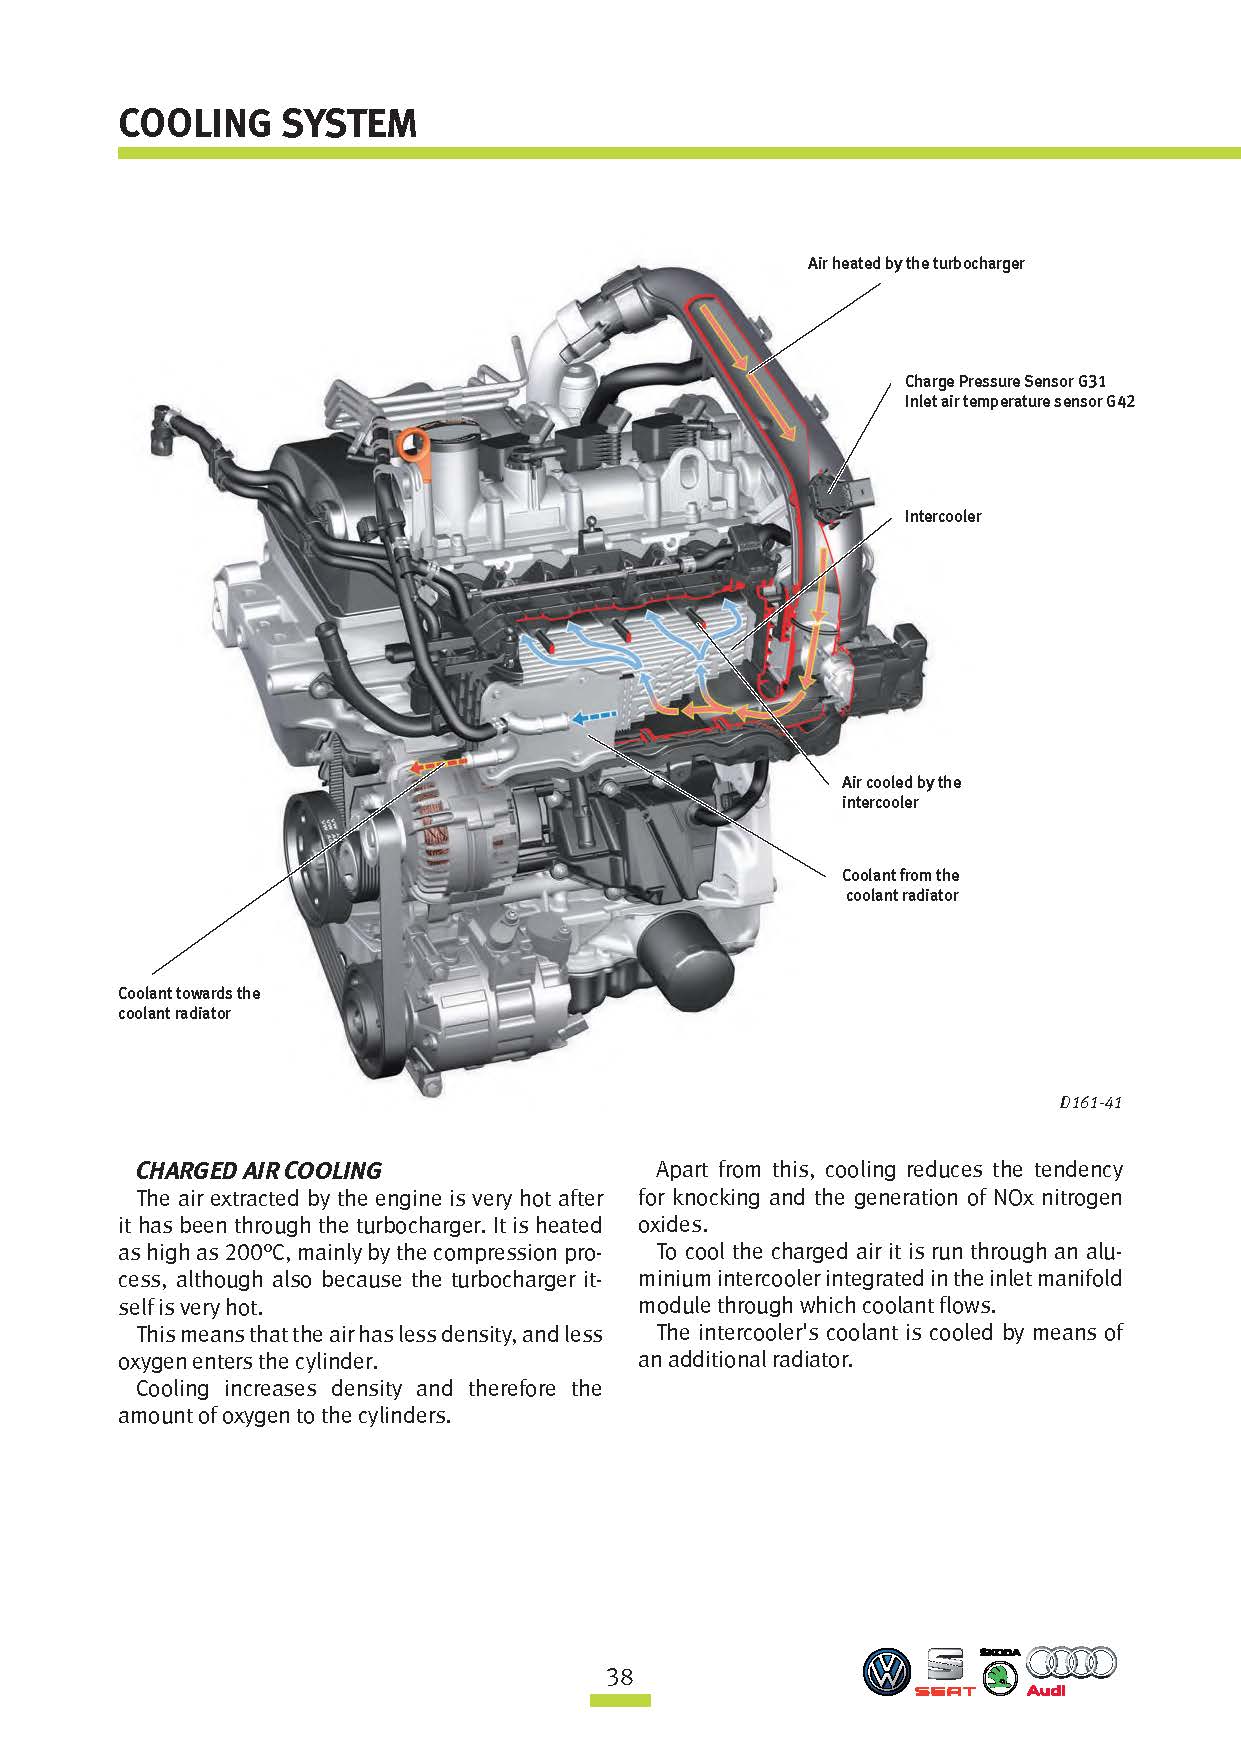 Volkswagen Family Engines EA211 And EA888